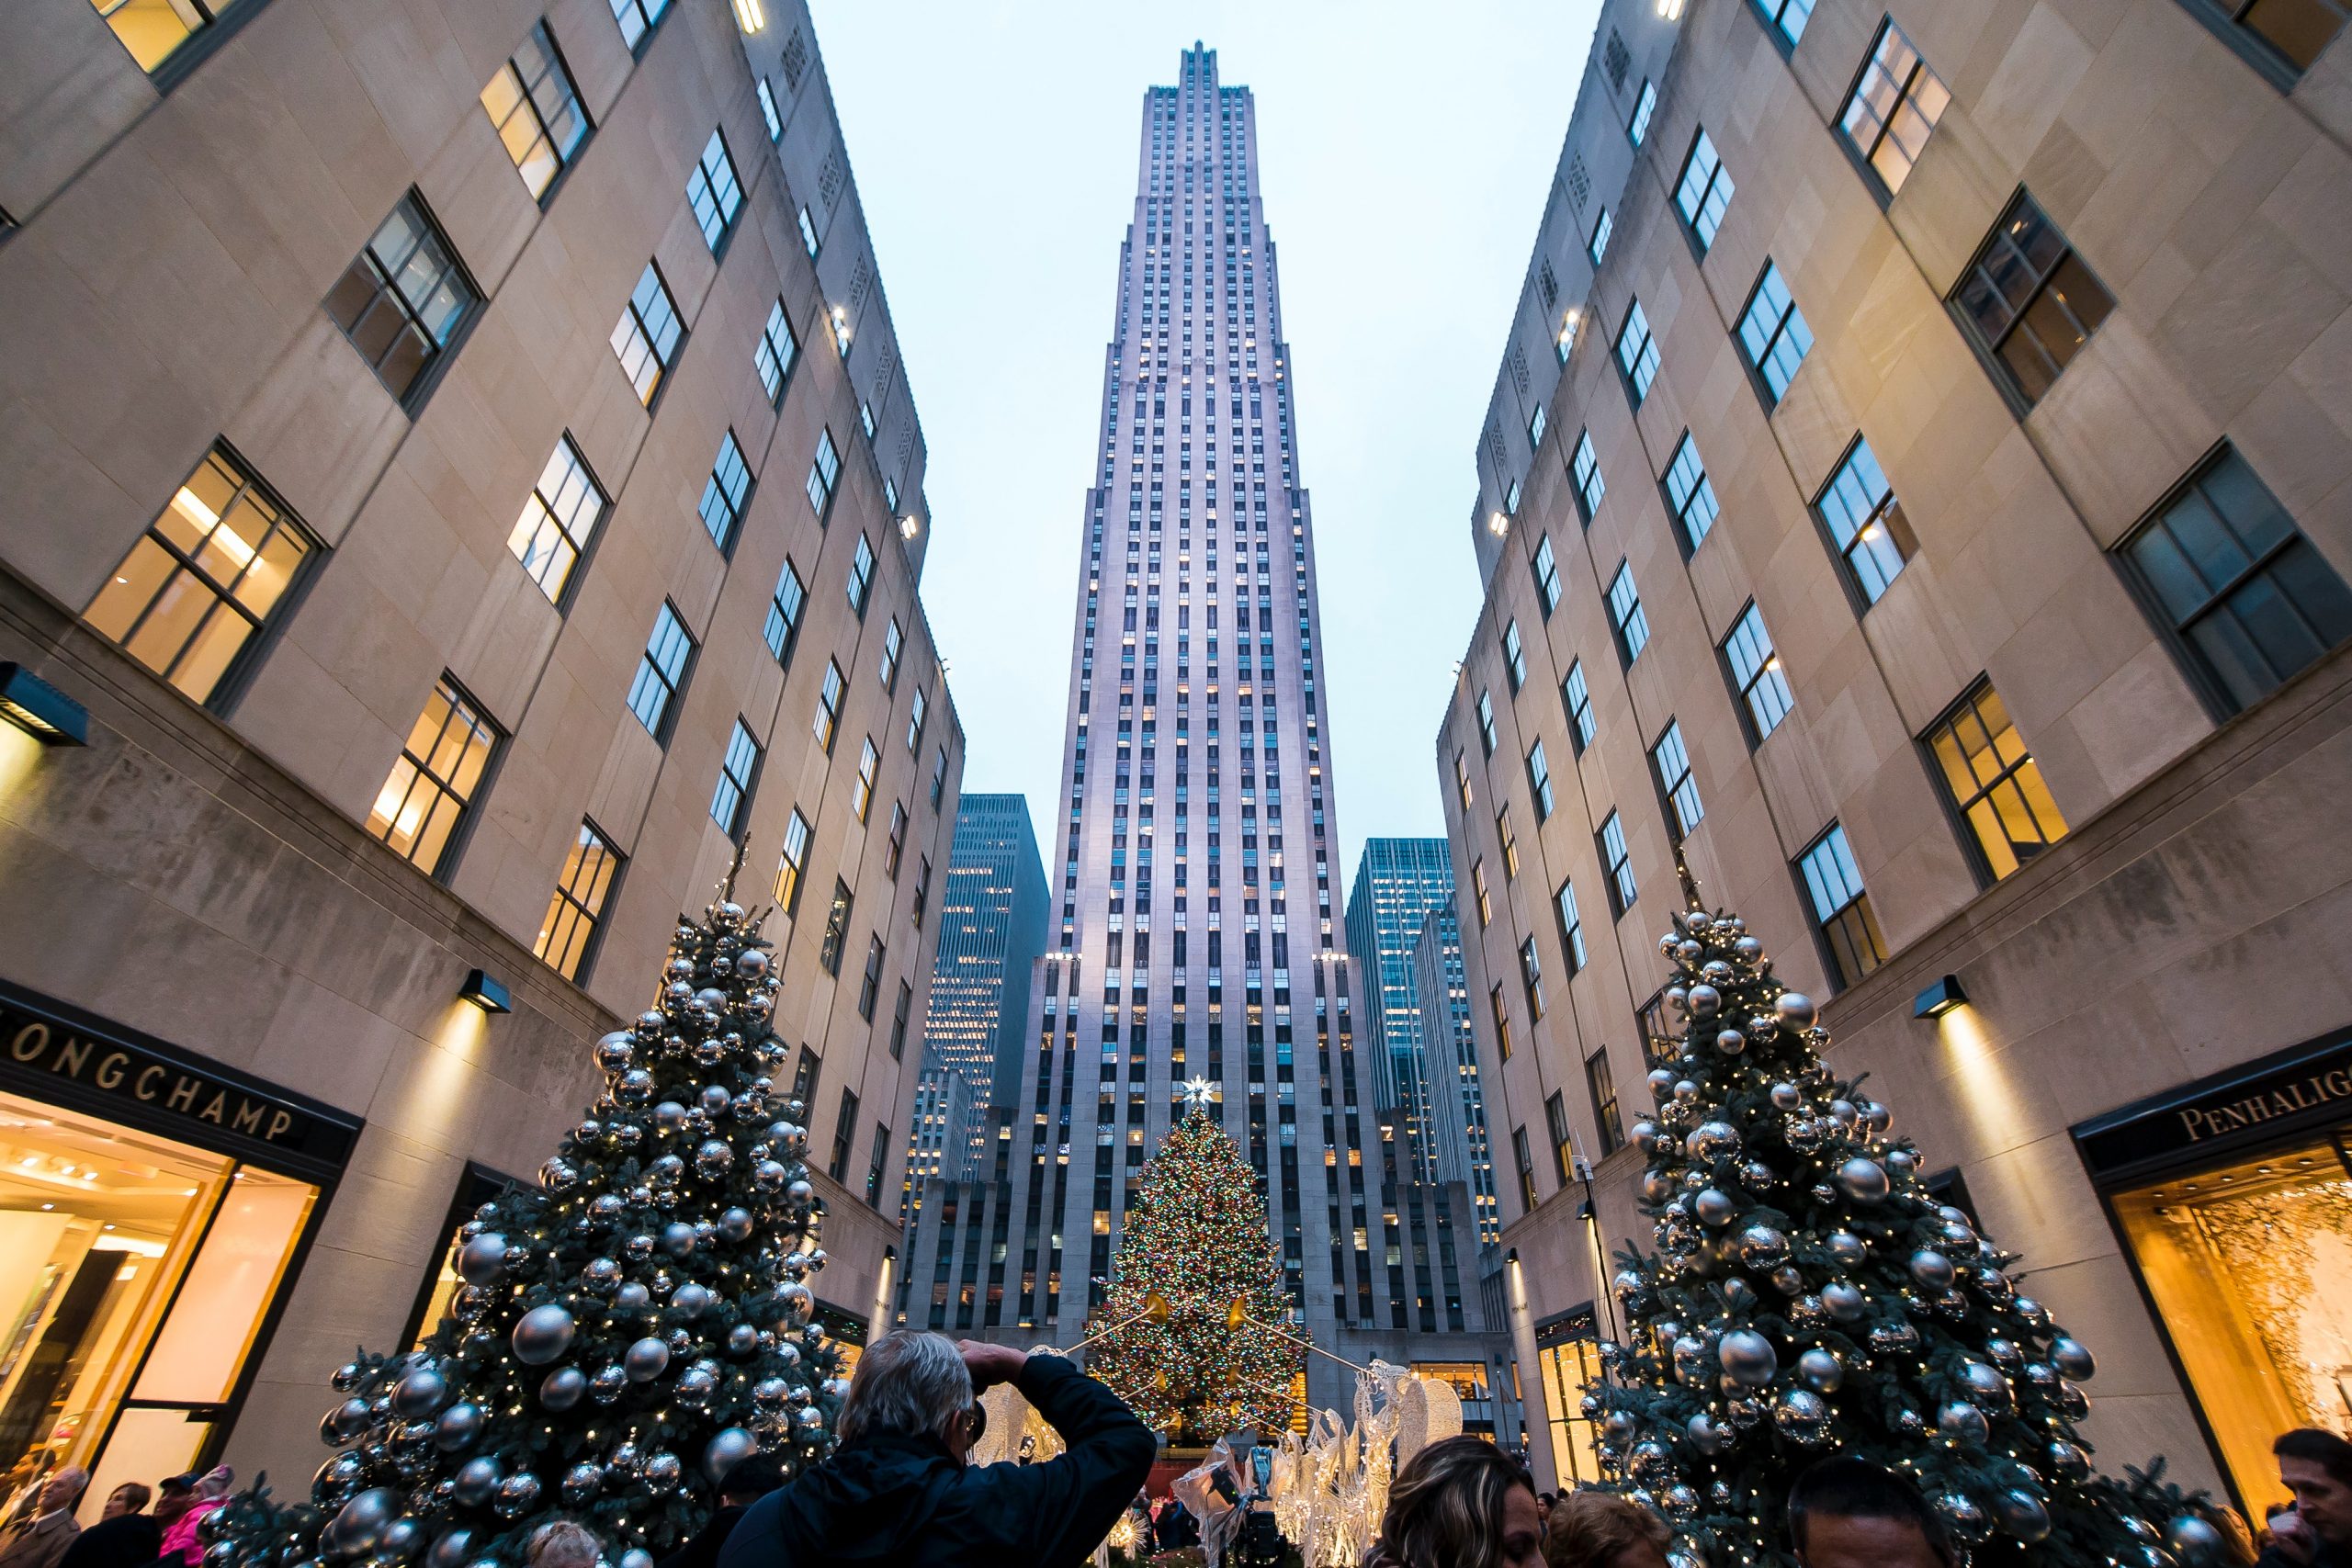 Rockefeller Christmas Tree, Winter Village at Bryant Park and More Ways to Celebrate the Holidays in NYC